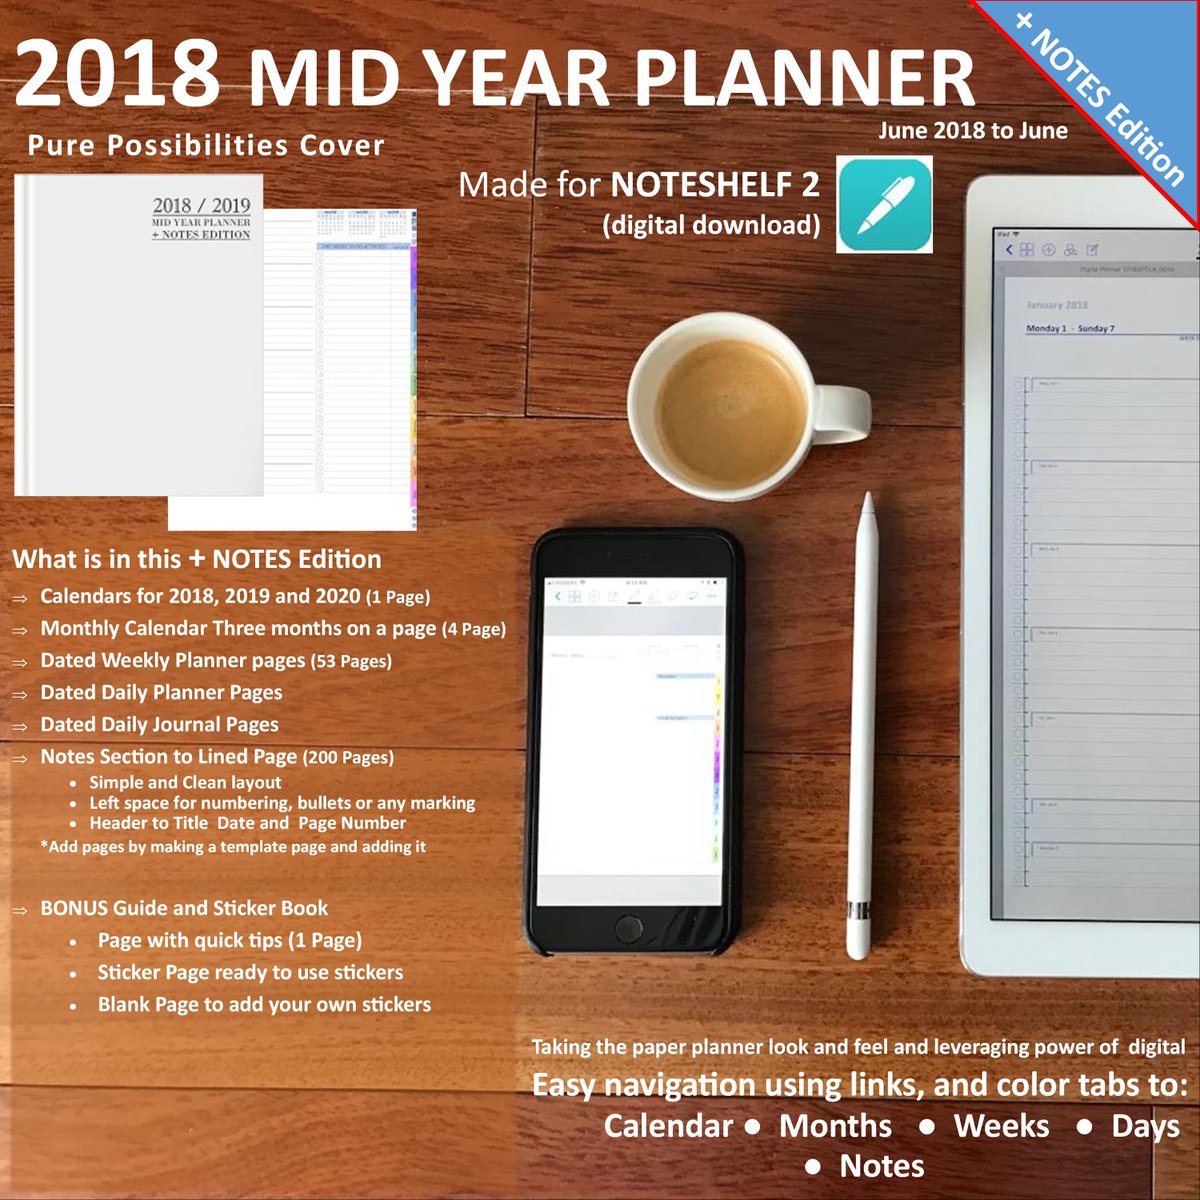 my #etsy shop: 2018 Mid-Year Planner +NOTES Edition (PURE POSSIBILITIES Cover) (Made for NoteShelf 2) etsy.me/2Mk2UwC #papergoods #calendar #apple #ipad #bulletjournal #daily #journal #planner #digitalplanner #deskgoal #conferenceplanner #digital